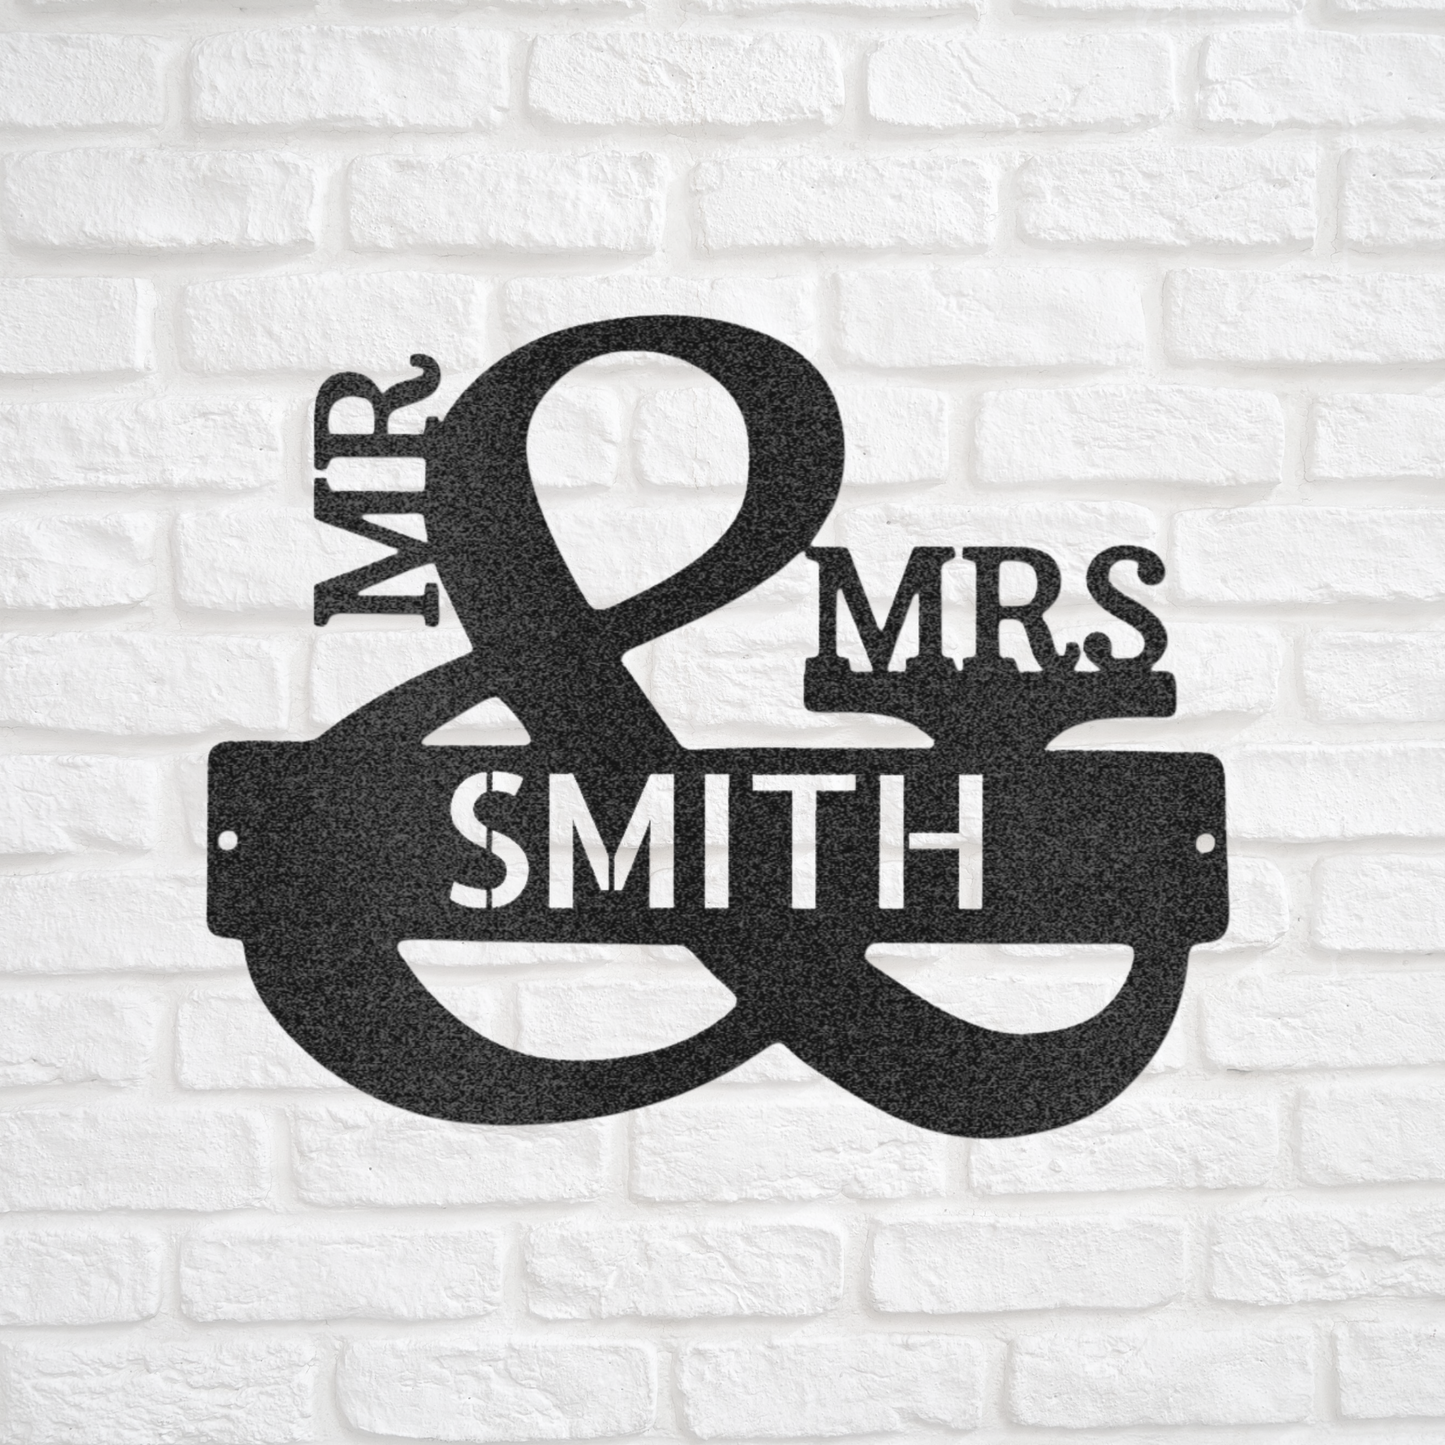 Personalized Mr. and Mrs. Monogram, Bold, Family Name Sign, Metal Wall Decor, Housewarming Gift, Metal Monogram Sign, Wedding Gift, Anniversary Gift